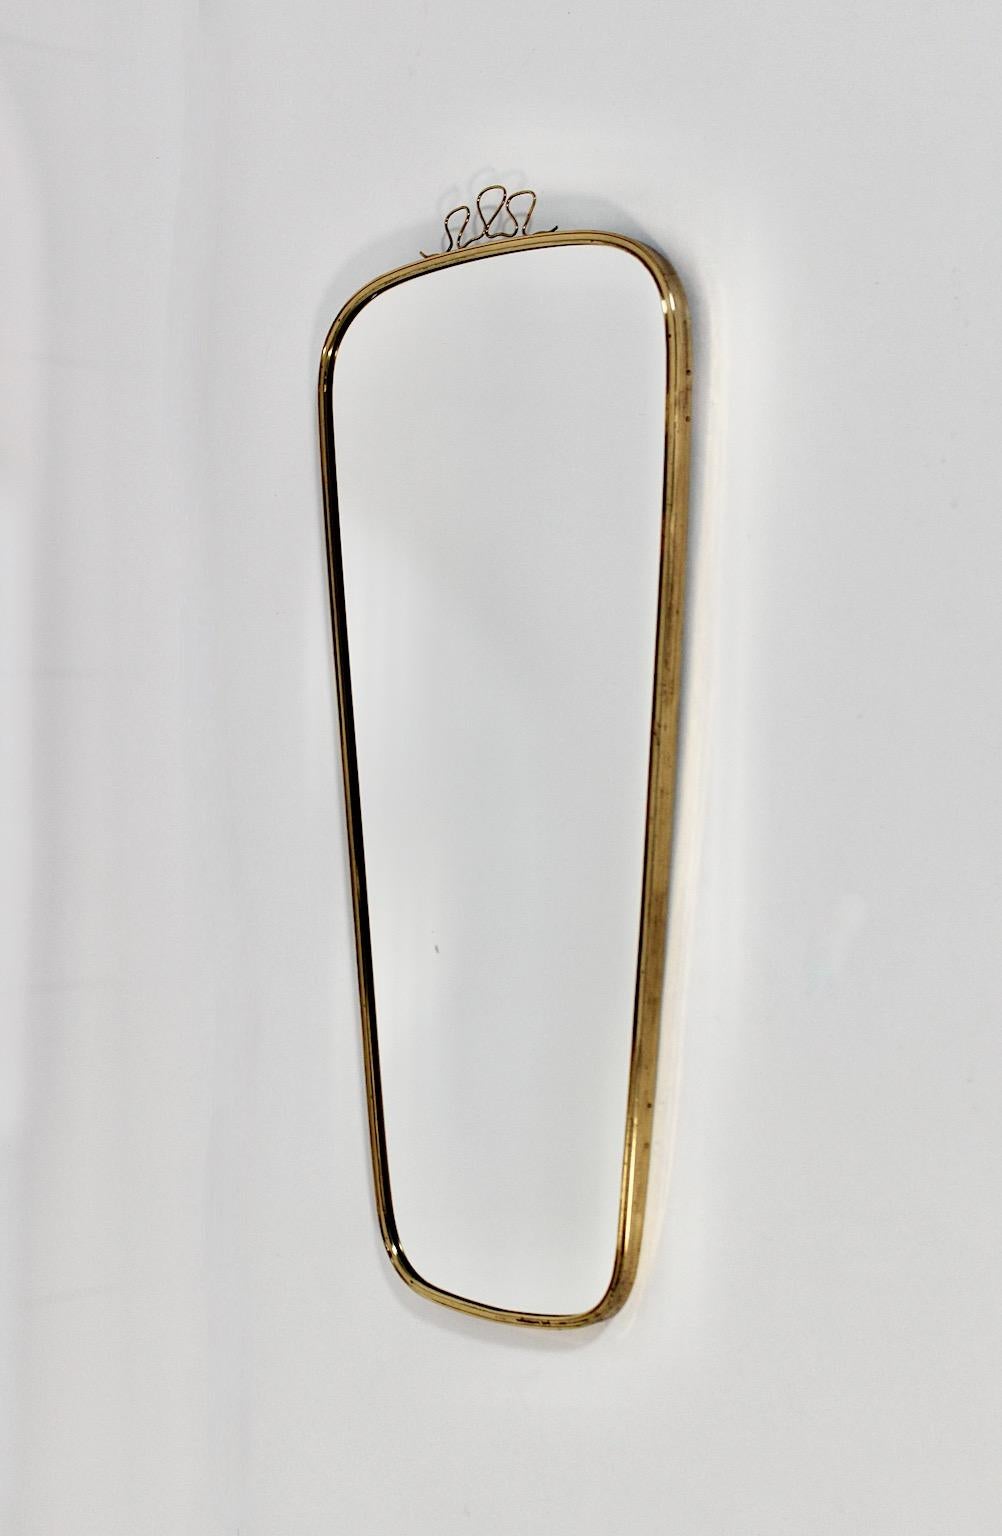 Mid-Century Modern vintage oval brass wall mirror with loops 1950s Austria.
An amazing wall mirror oval like with brassed frame and mirror glass in oval like form and cute loops at the top.
This wall mirror shows a wonderful size wether it would be